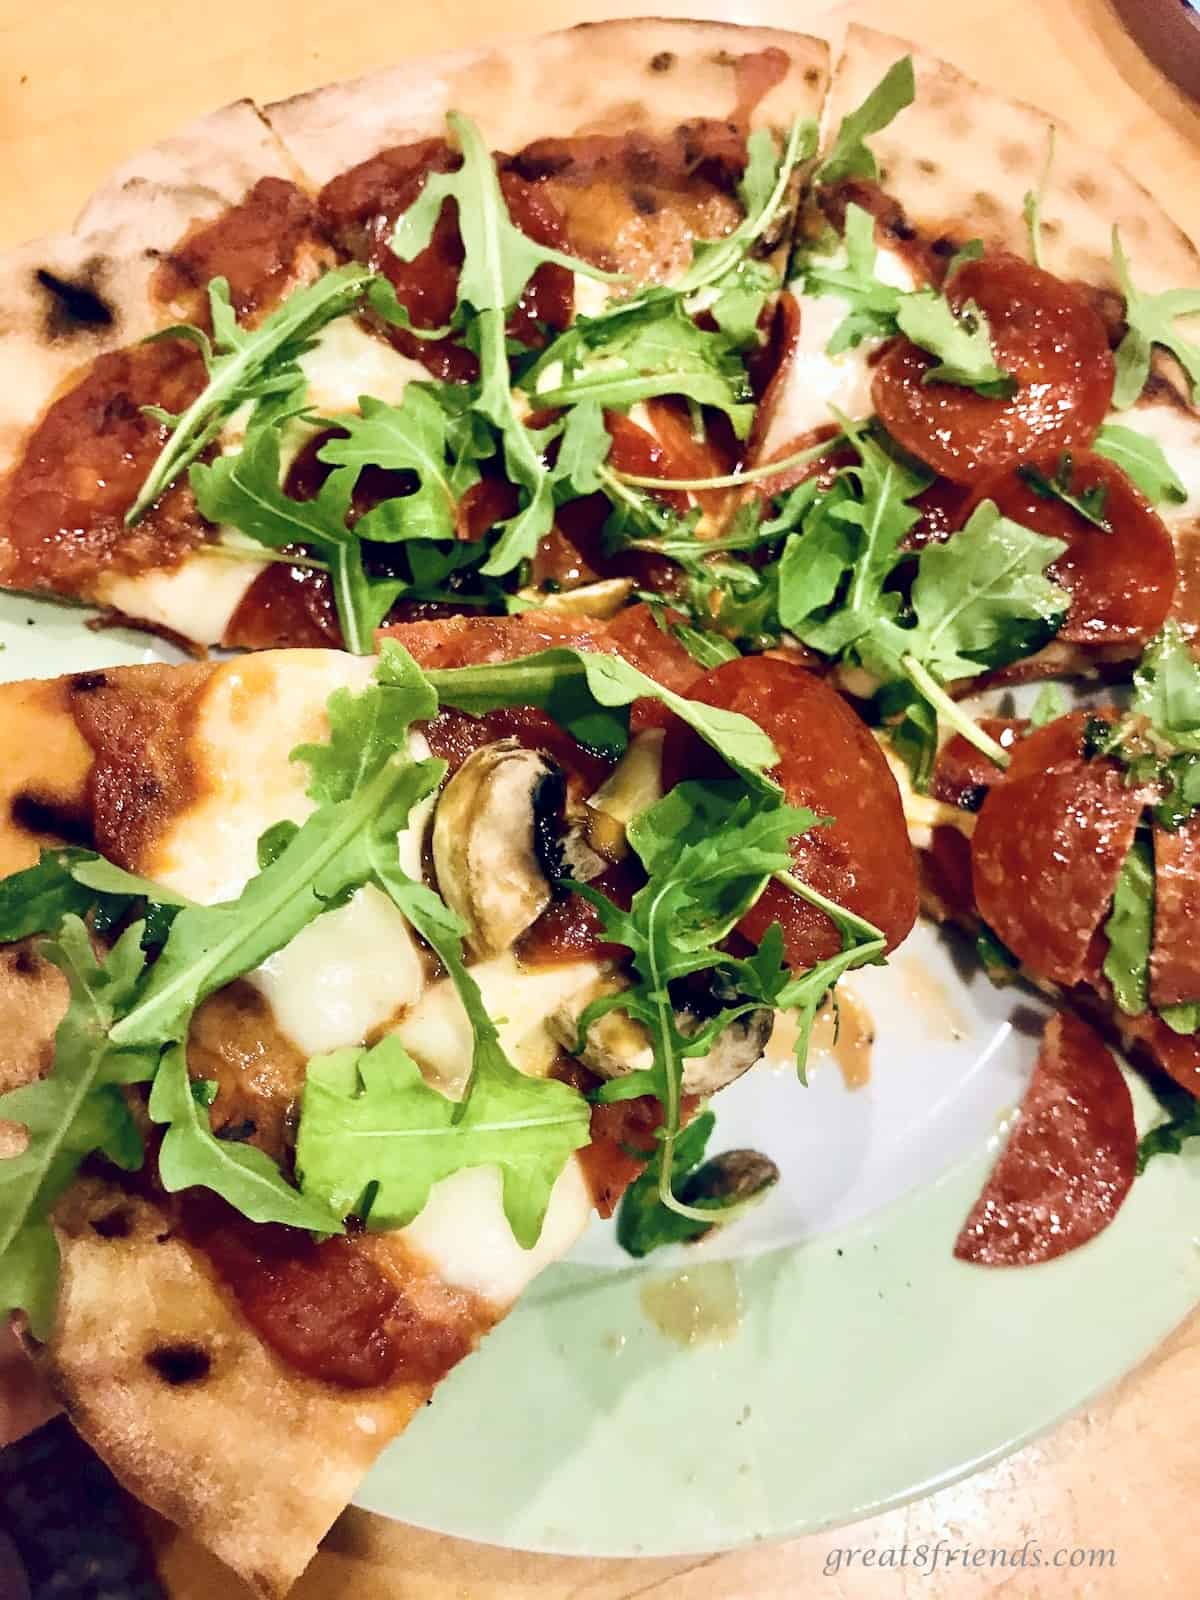 Upclose photo of a pizza cooked on the grill topped with sauce, cheese, pepperoni, and arugula.